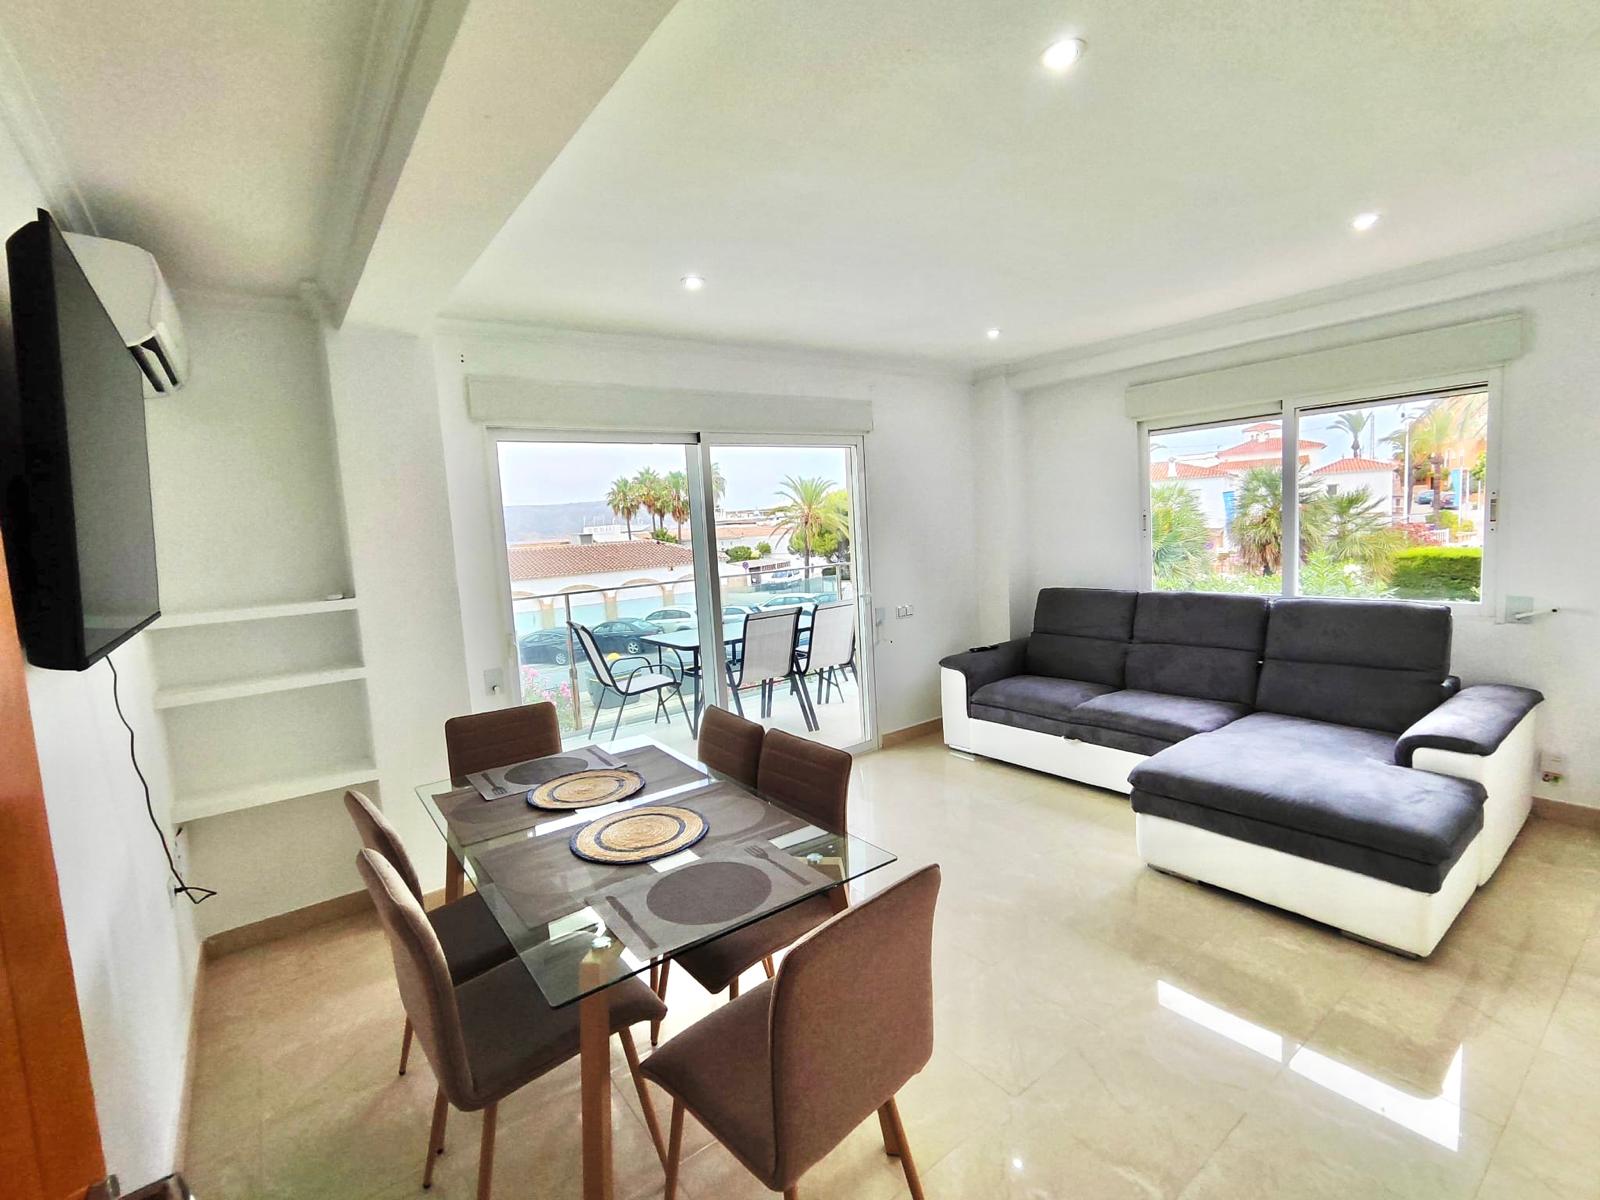 2-bedroom apartment for sale on the beach of the sandy beach of Javea